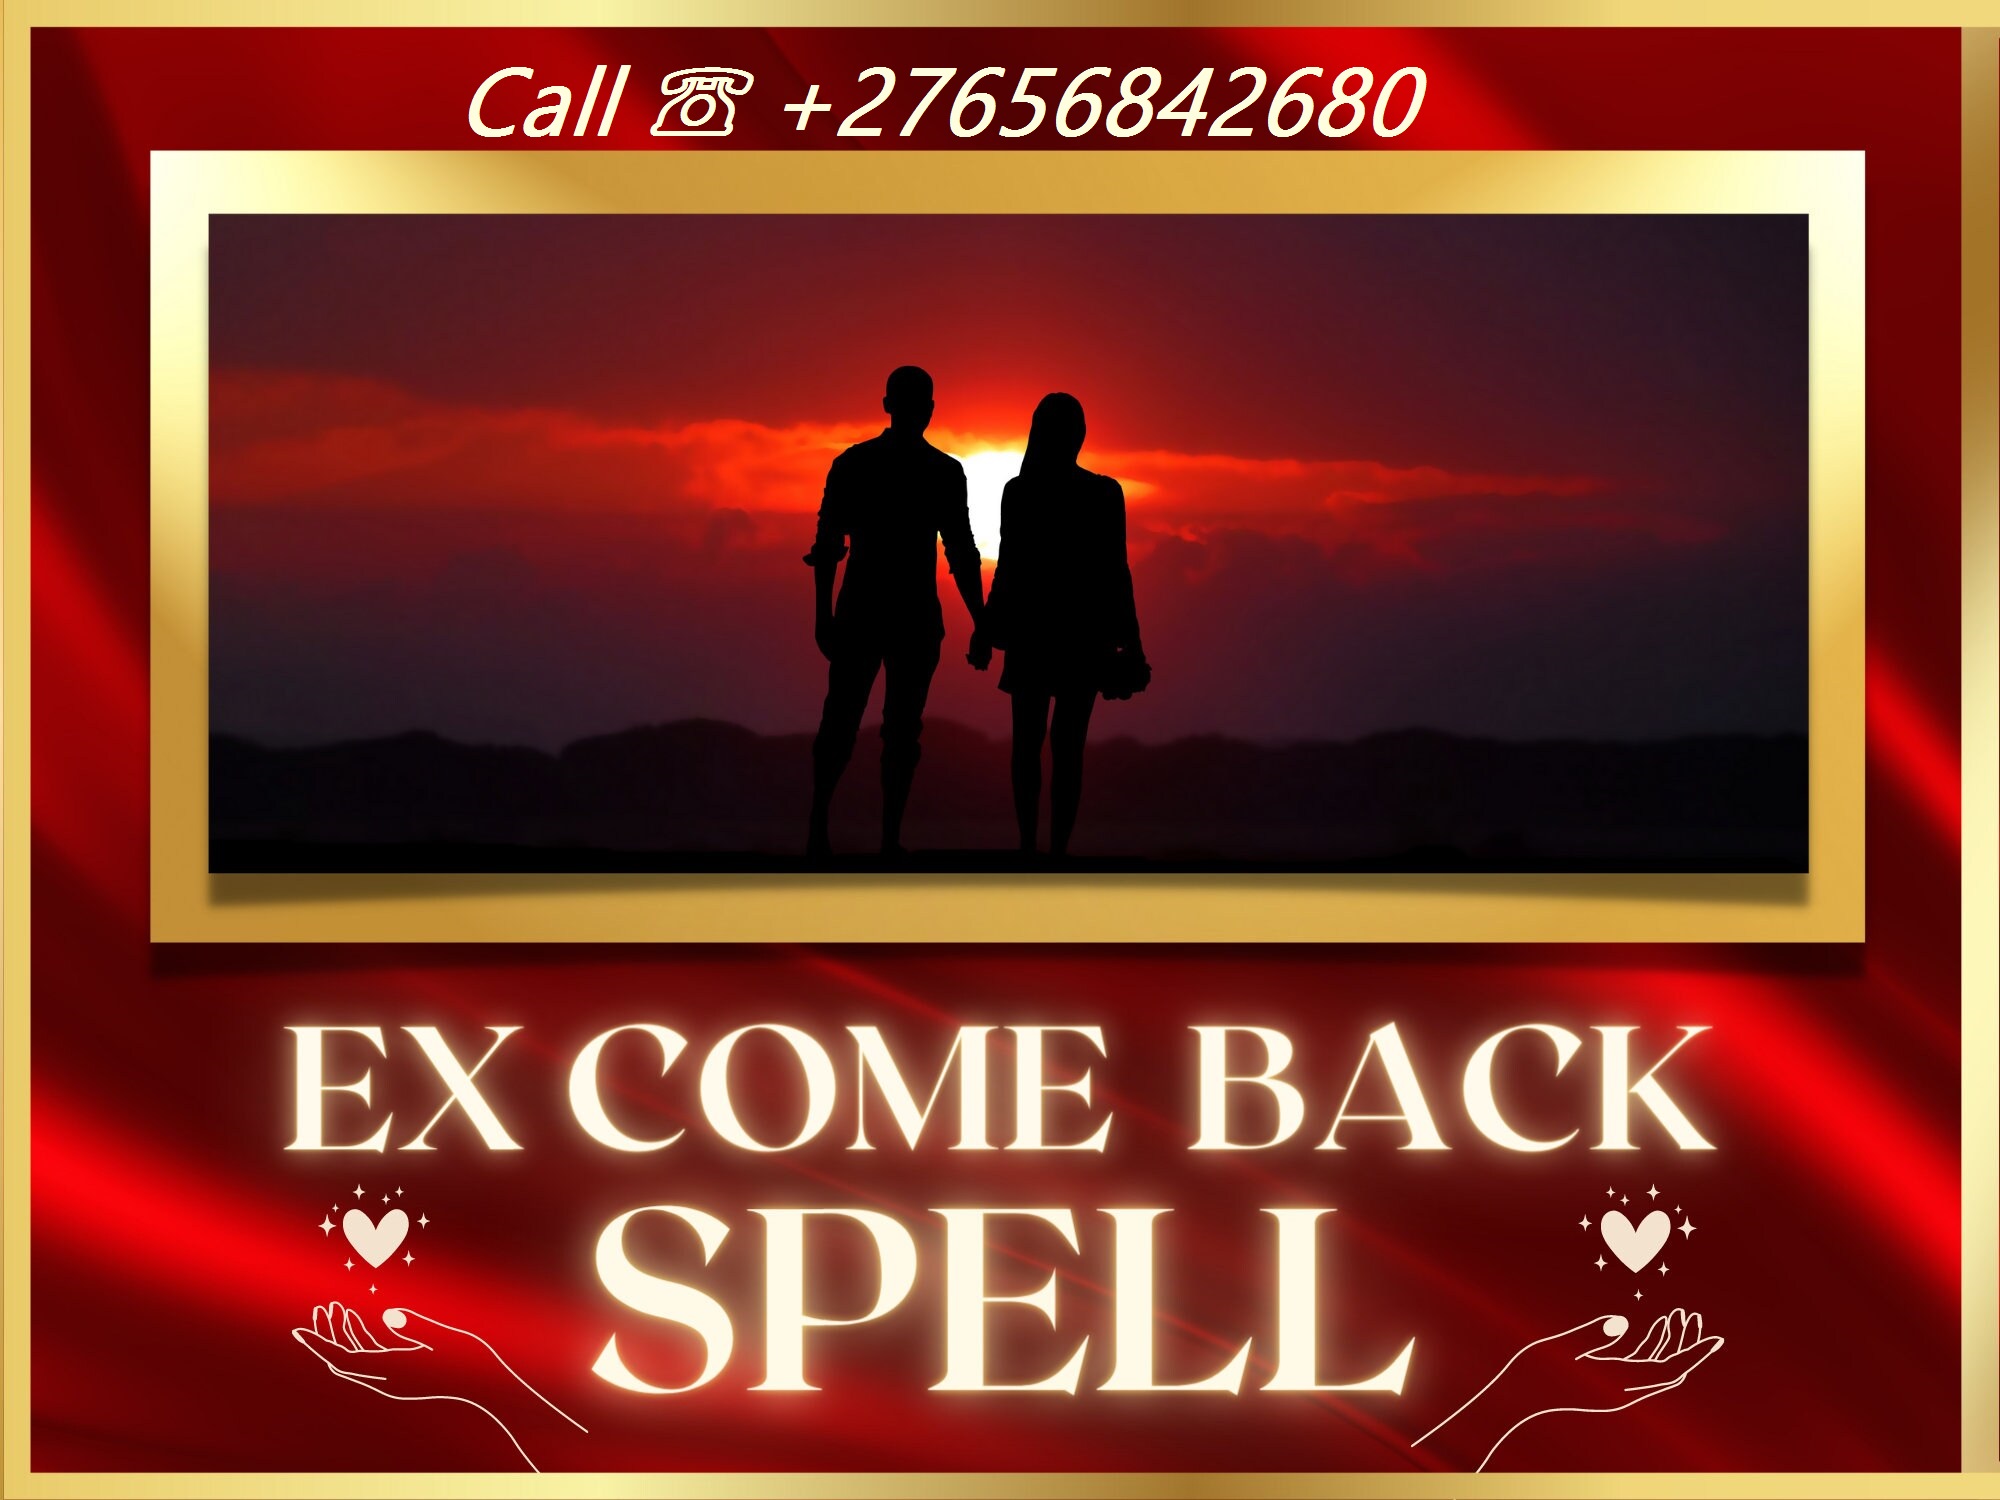 Love Spells In Graaff-Reinet And Thohoyandou Town Call ☏ +27656842680 Bring Back Ex Love In Tembisa And Mossel Bay South Africa